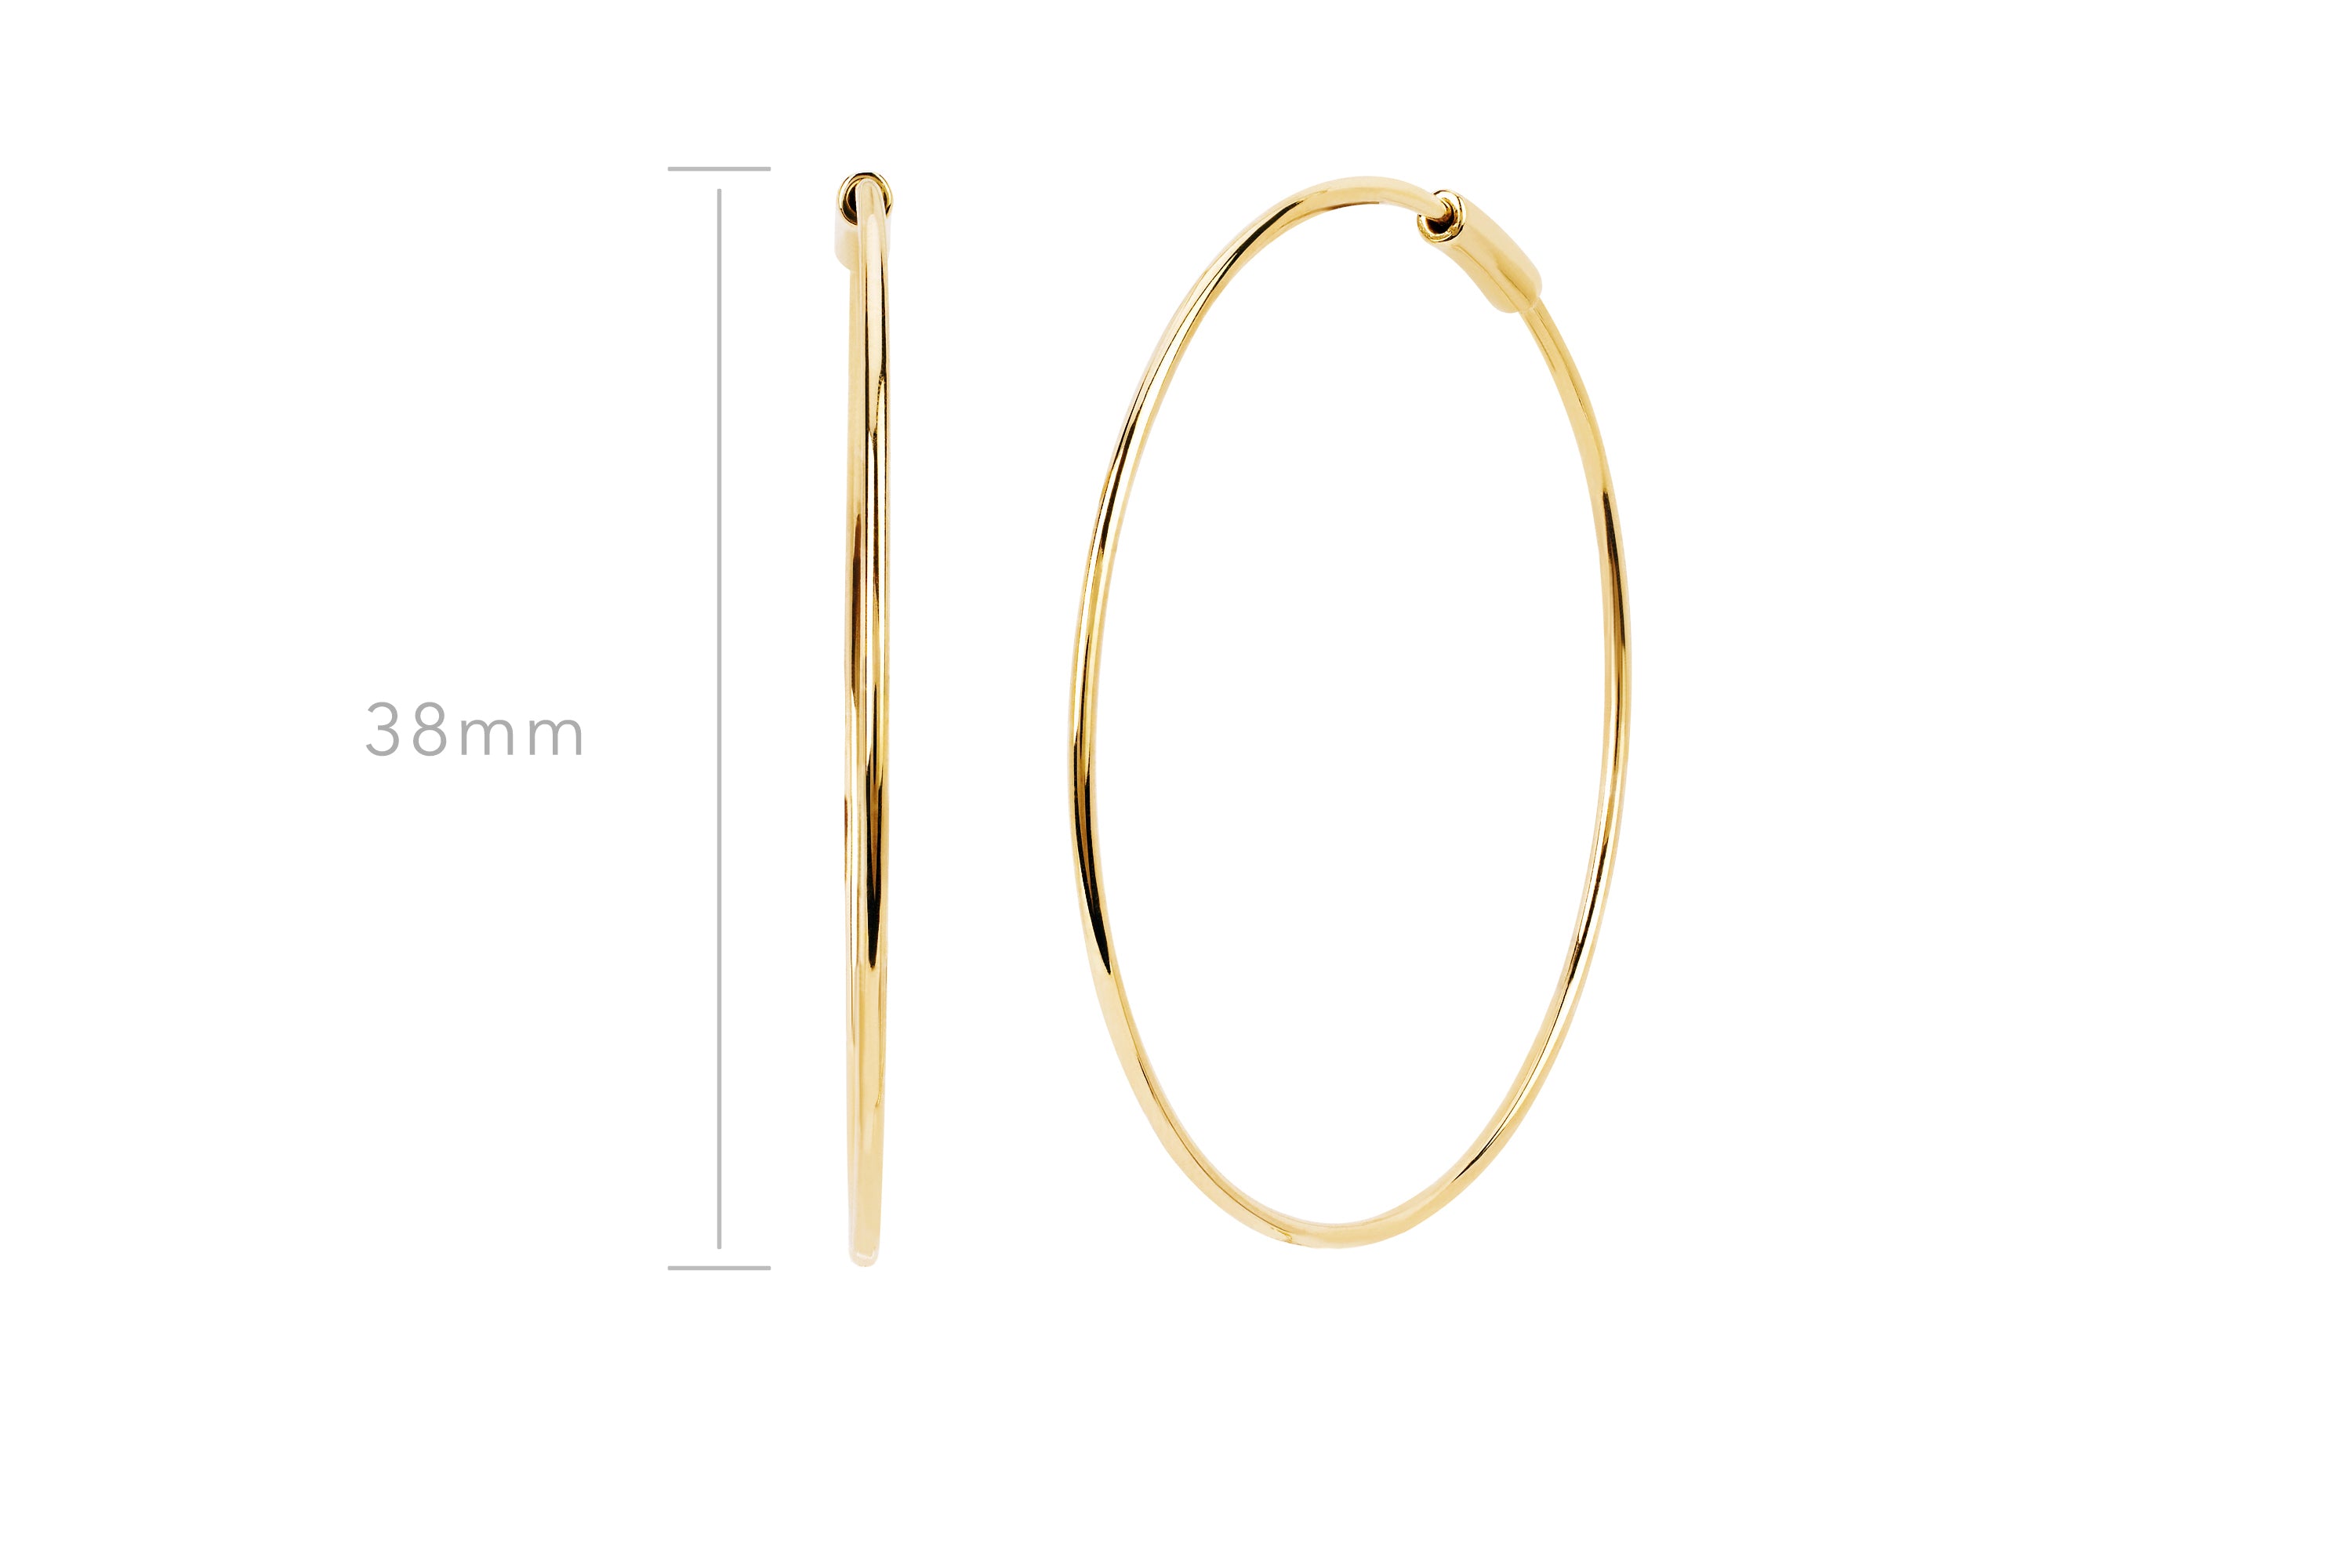 Essential Gold Hoop Earrings in 14k yellow gold with size measurement